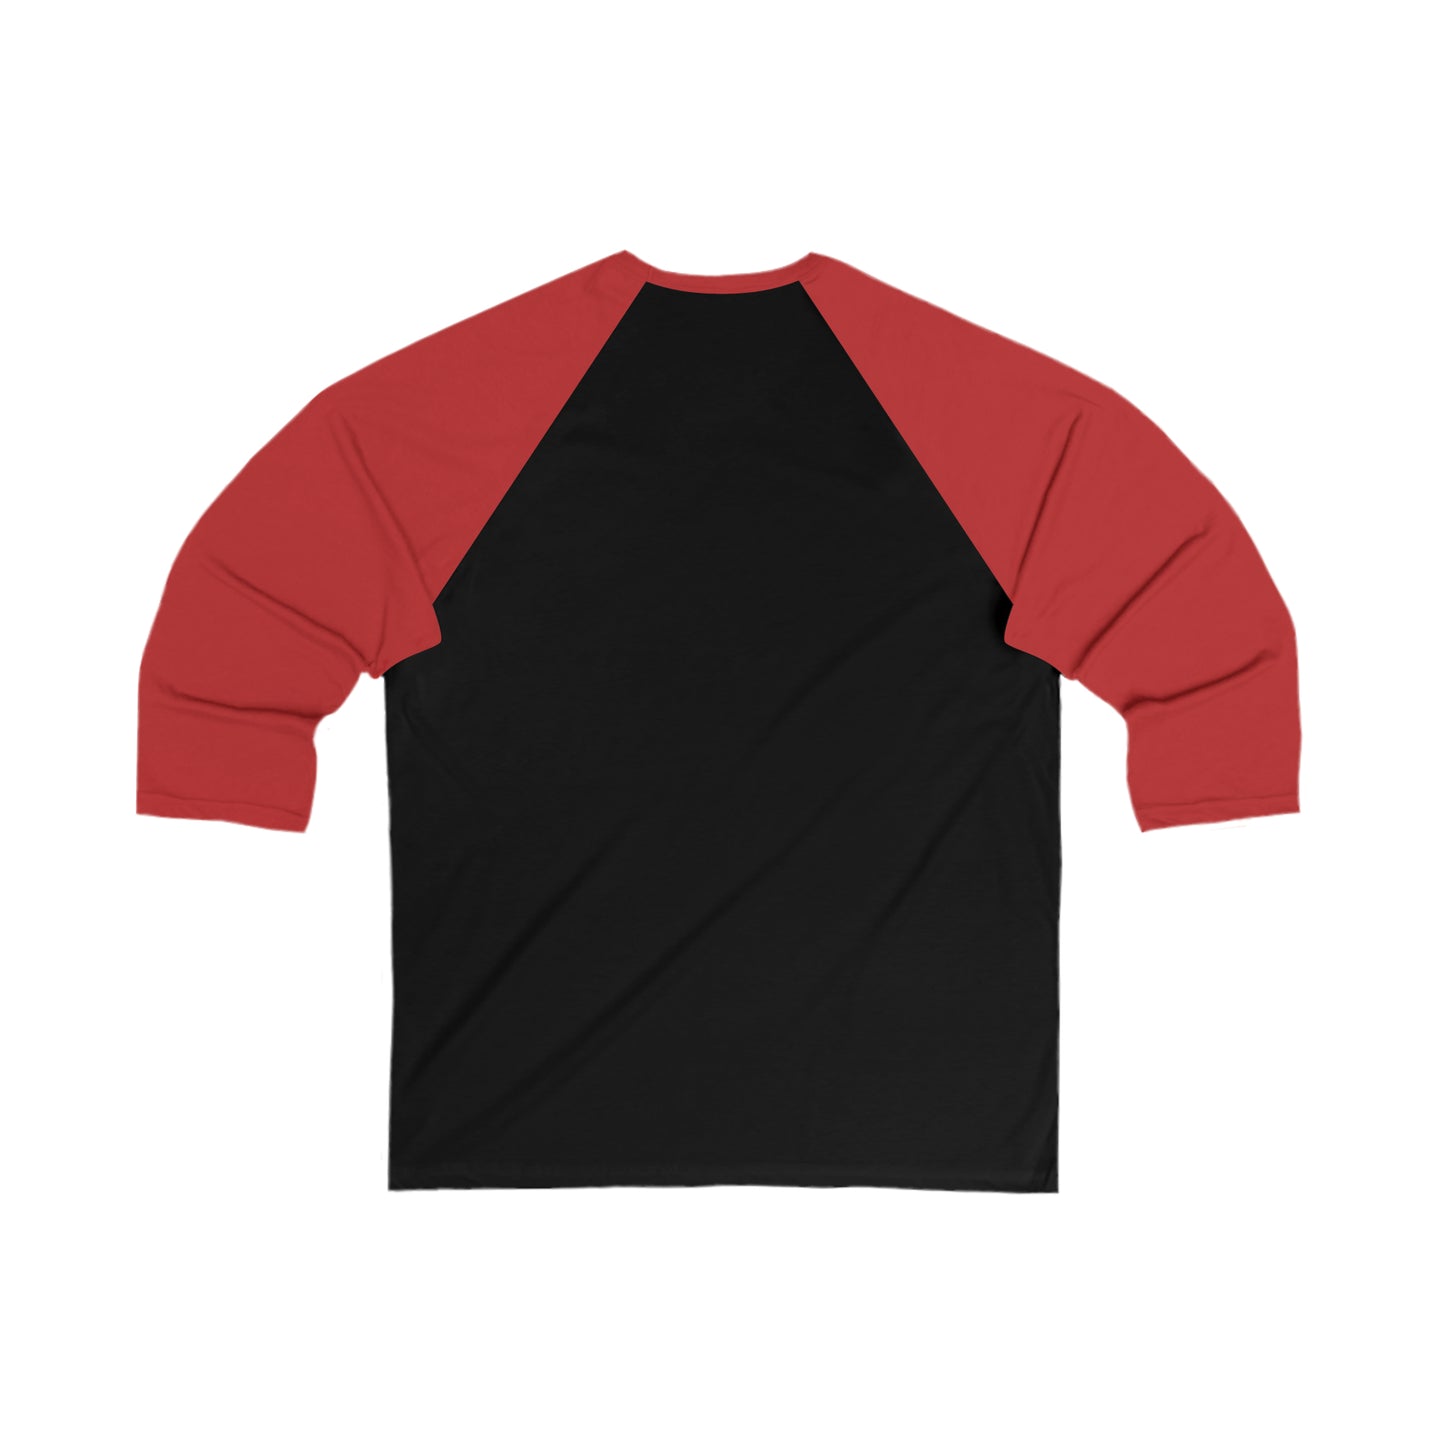 Just One Night 3\4 Sleeve Red and Black Baseball Tee